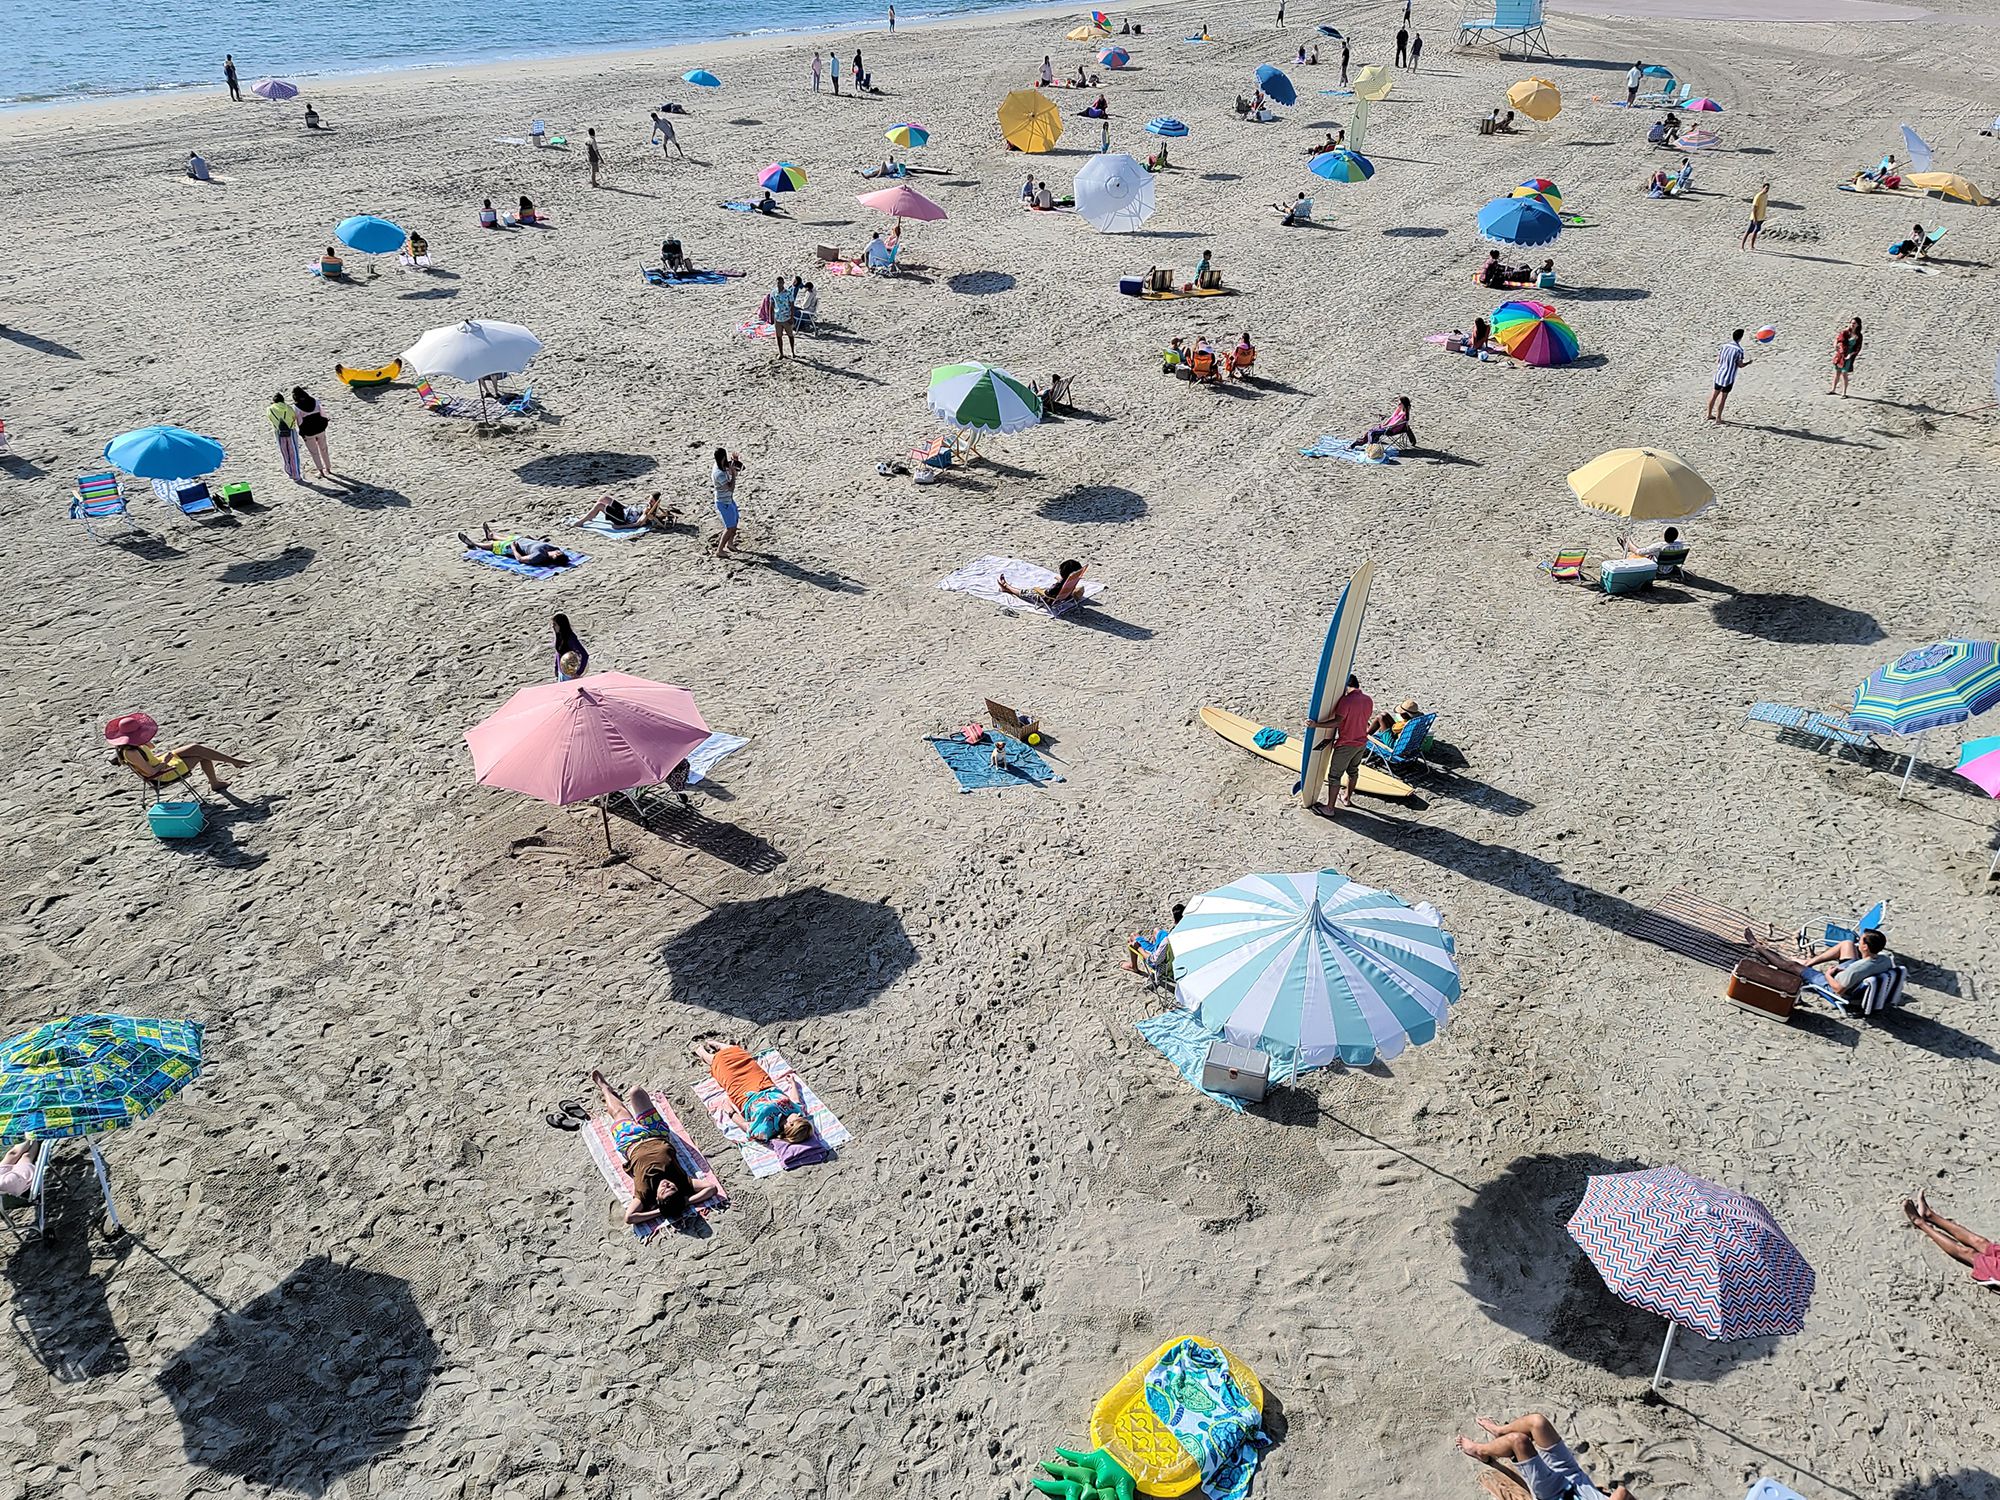 Photo taken on Galaxy S20 Ultra of a beach with many people. As we zoom in on the photo, we see a funny moment of a dog sitting on a beach towel with pink goggles on, showing how Space Zoom lets you find moments you might have otherwise missed